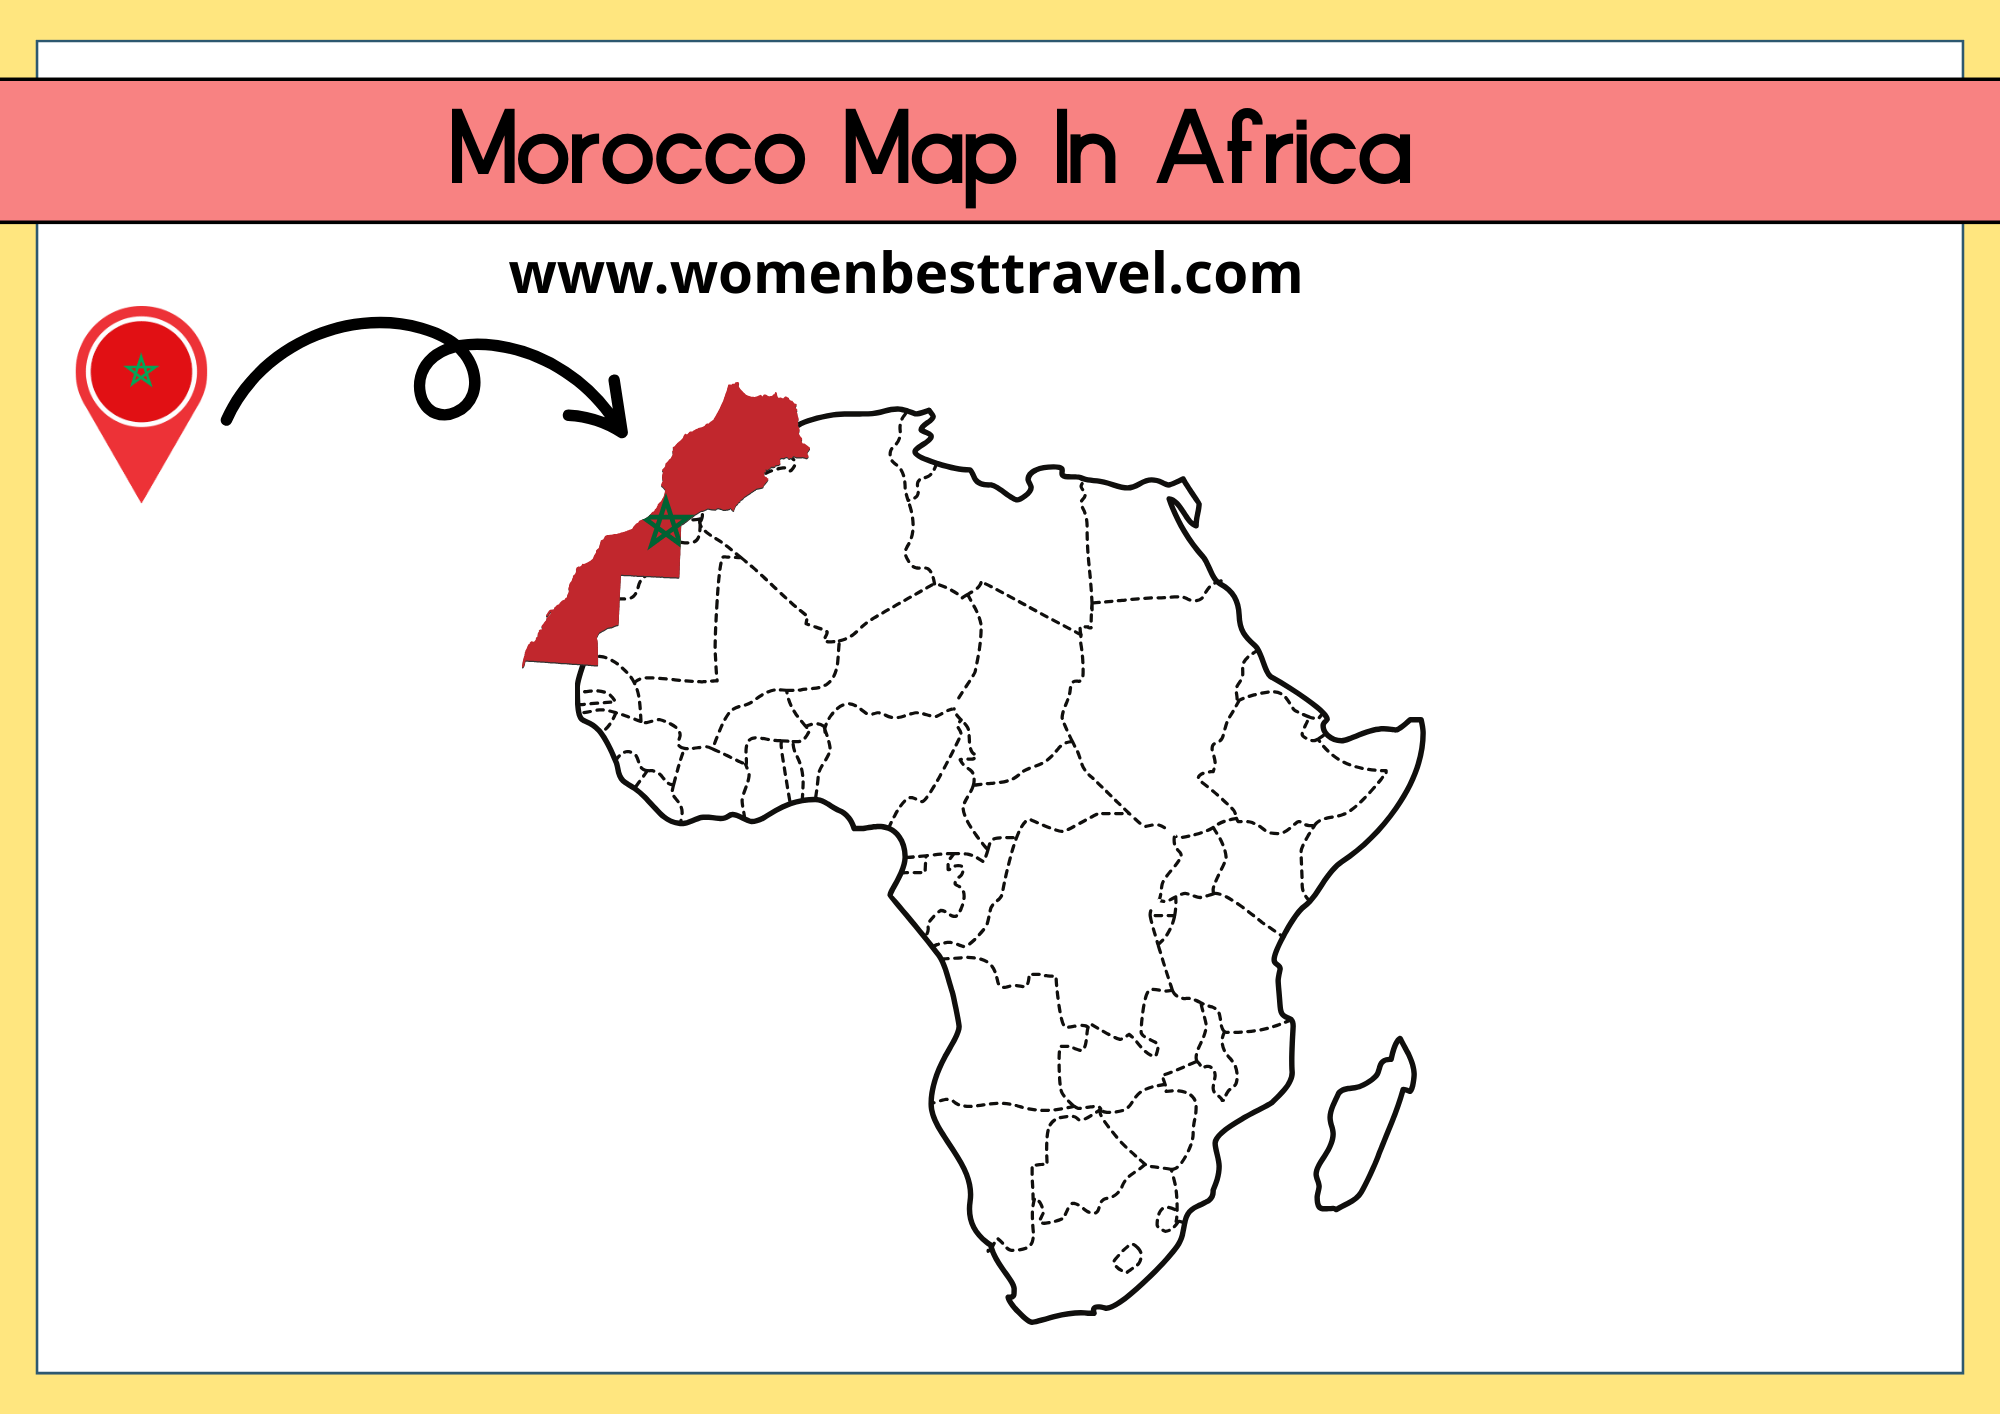 Morocco Map in Africa